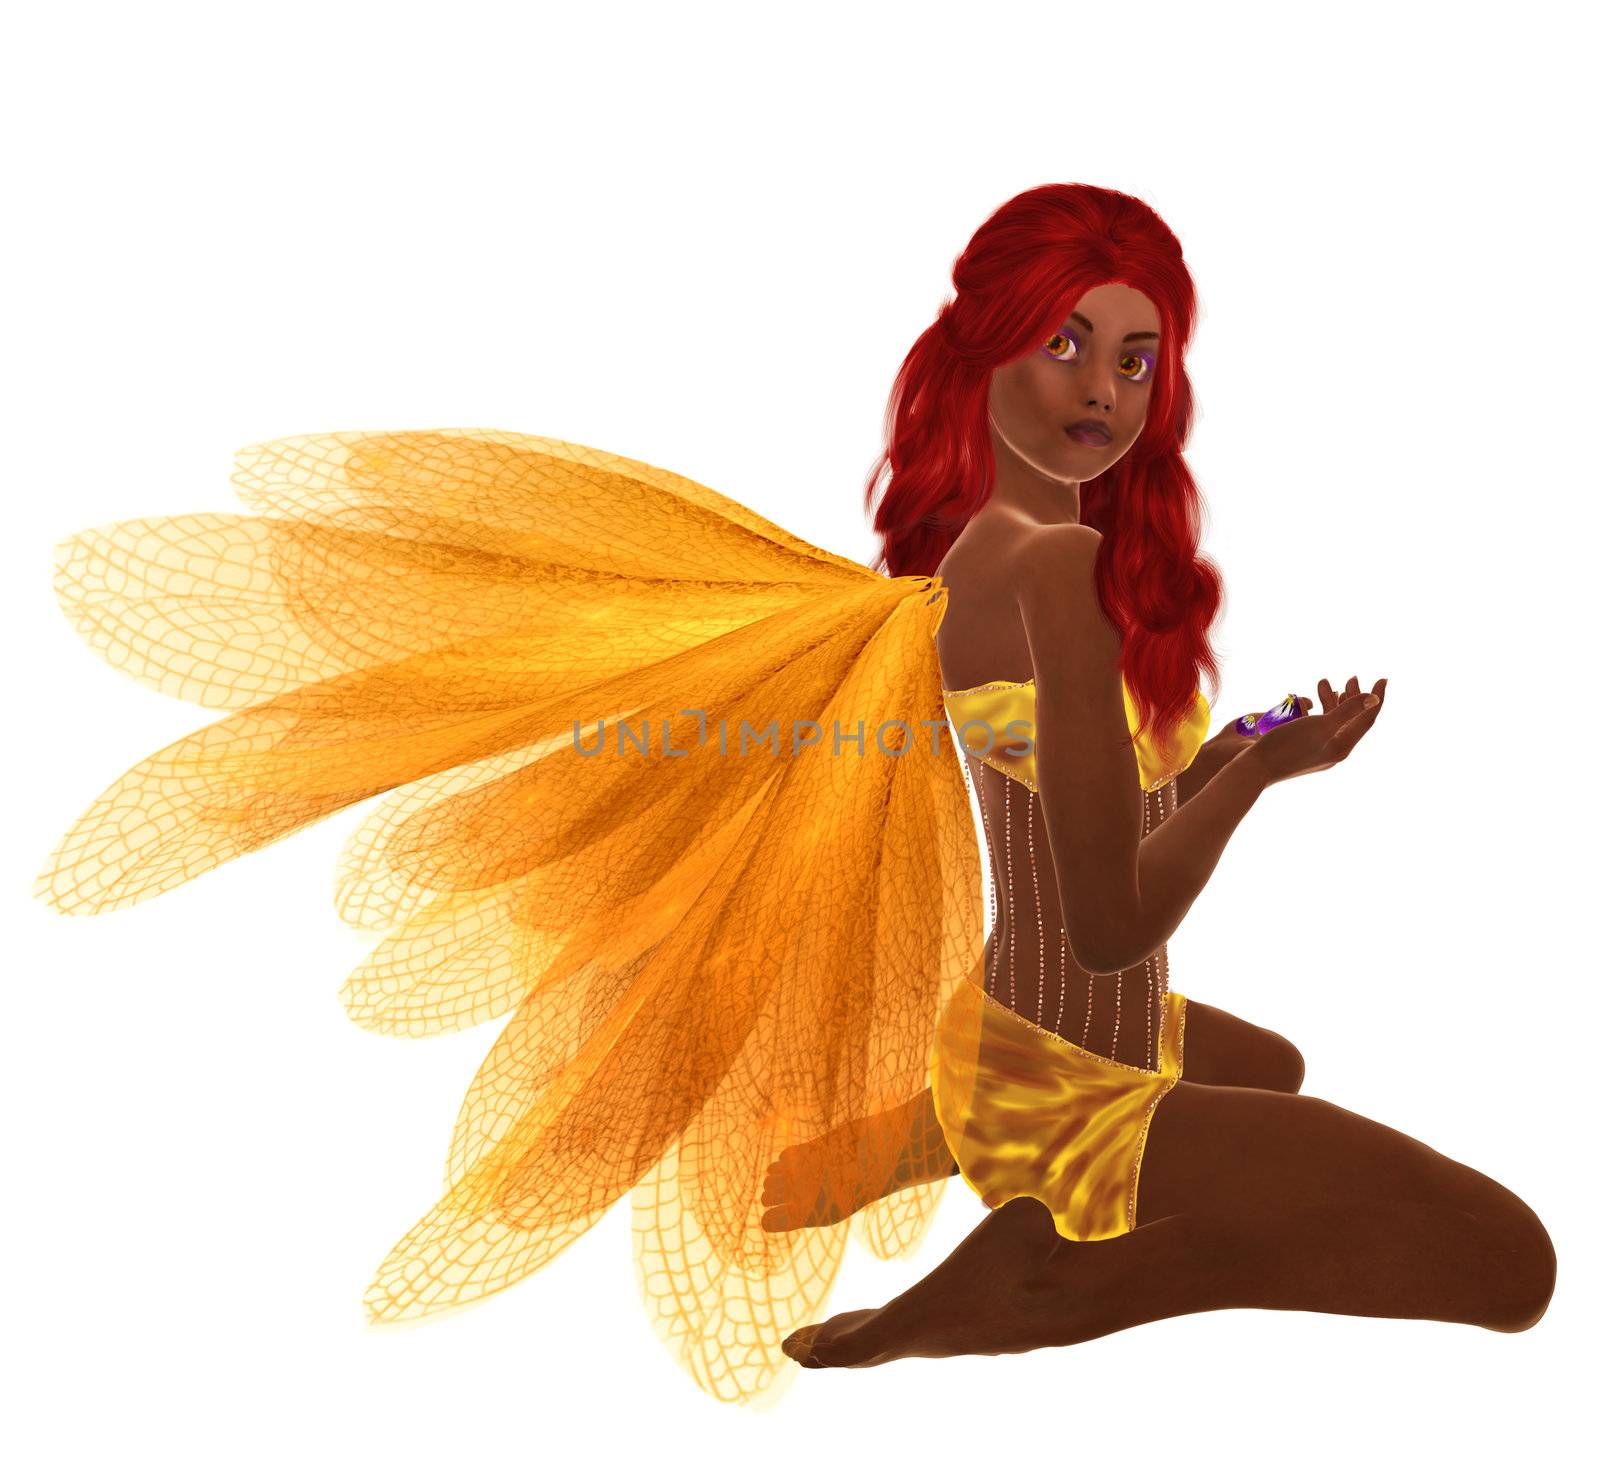 Yellow fairy with red hair, sitting holding flowers in her hand